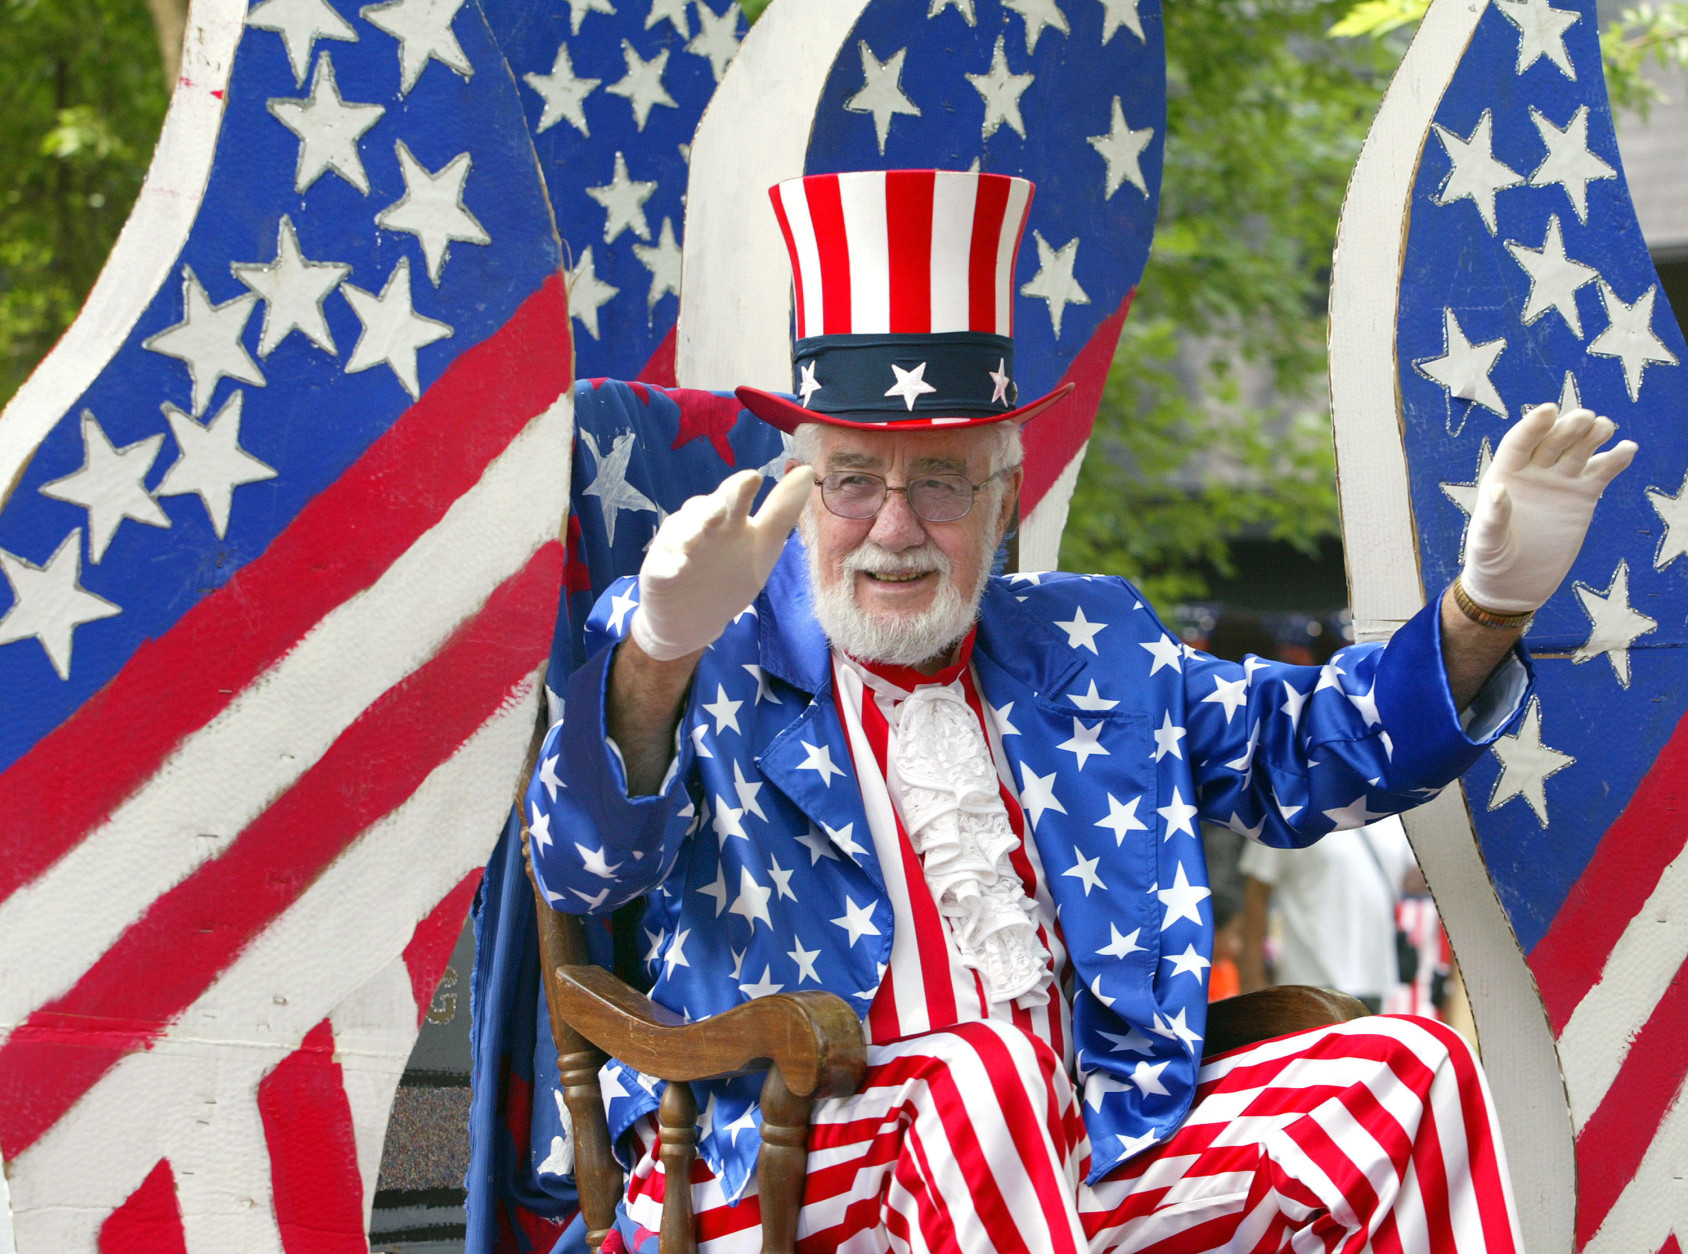 DES PLAINES, IL - JULY 3: A participant dressed in flag attire waves while riding on his float during the Fourth of July parade July 3, 2004 in Des Plaines, Illinois. America will celebrate its 228th birthday July 4, 2004. (Photo by Tim Boyle/Getty Images)